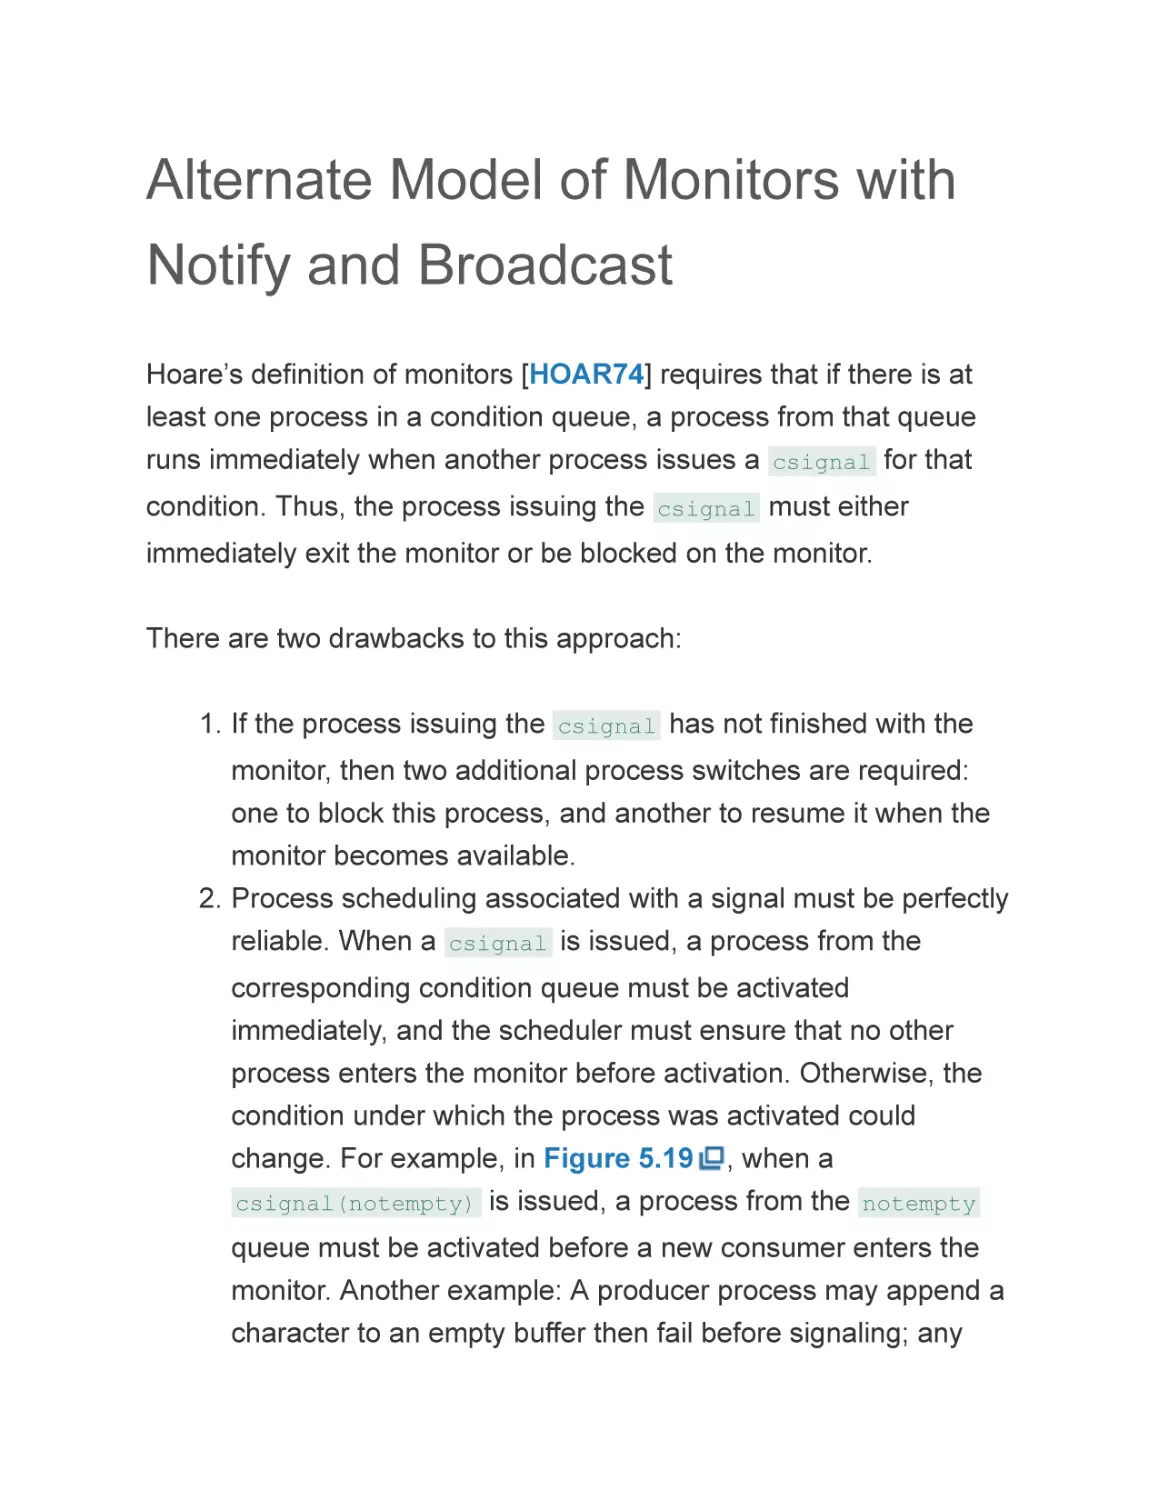 Alternate Model of Monitors with Notify and Broadcast